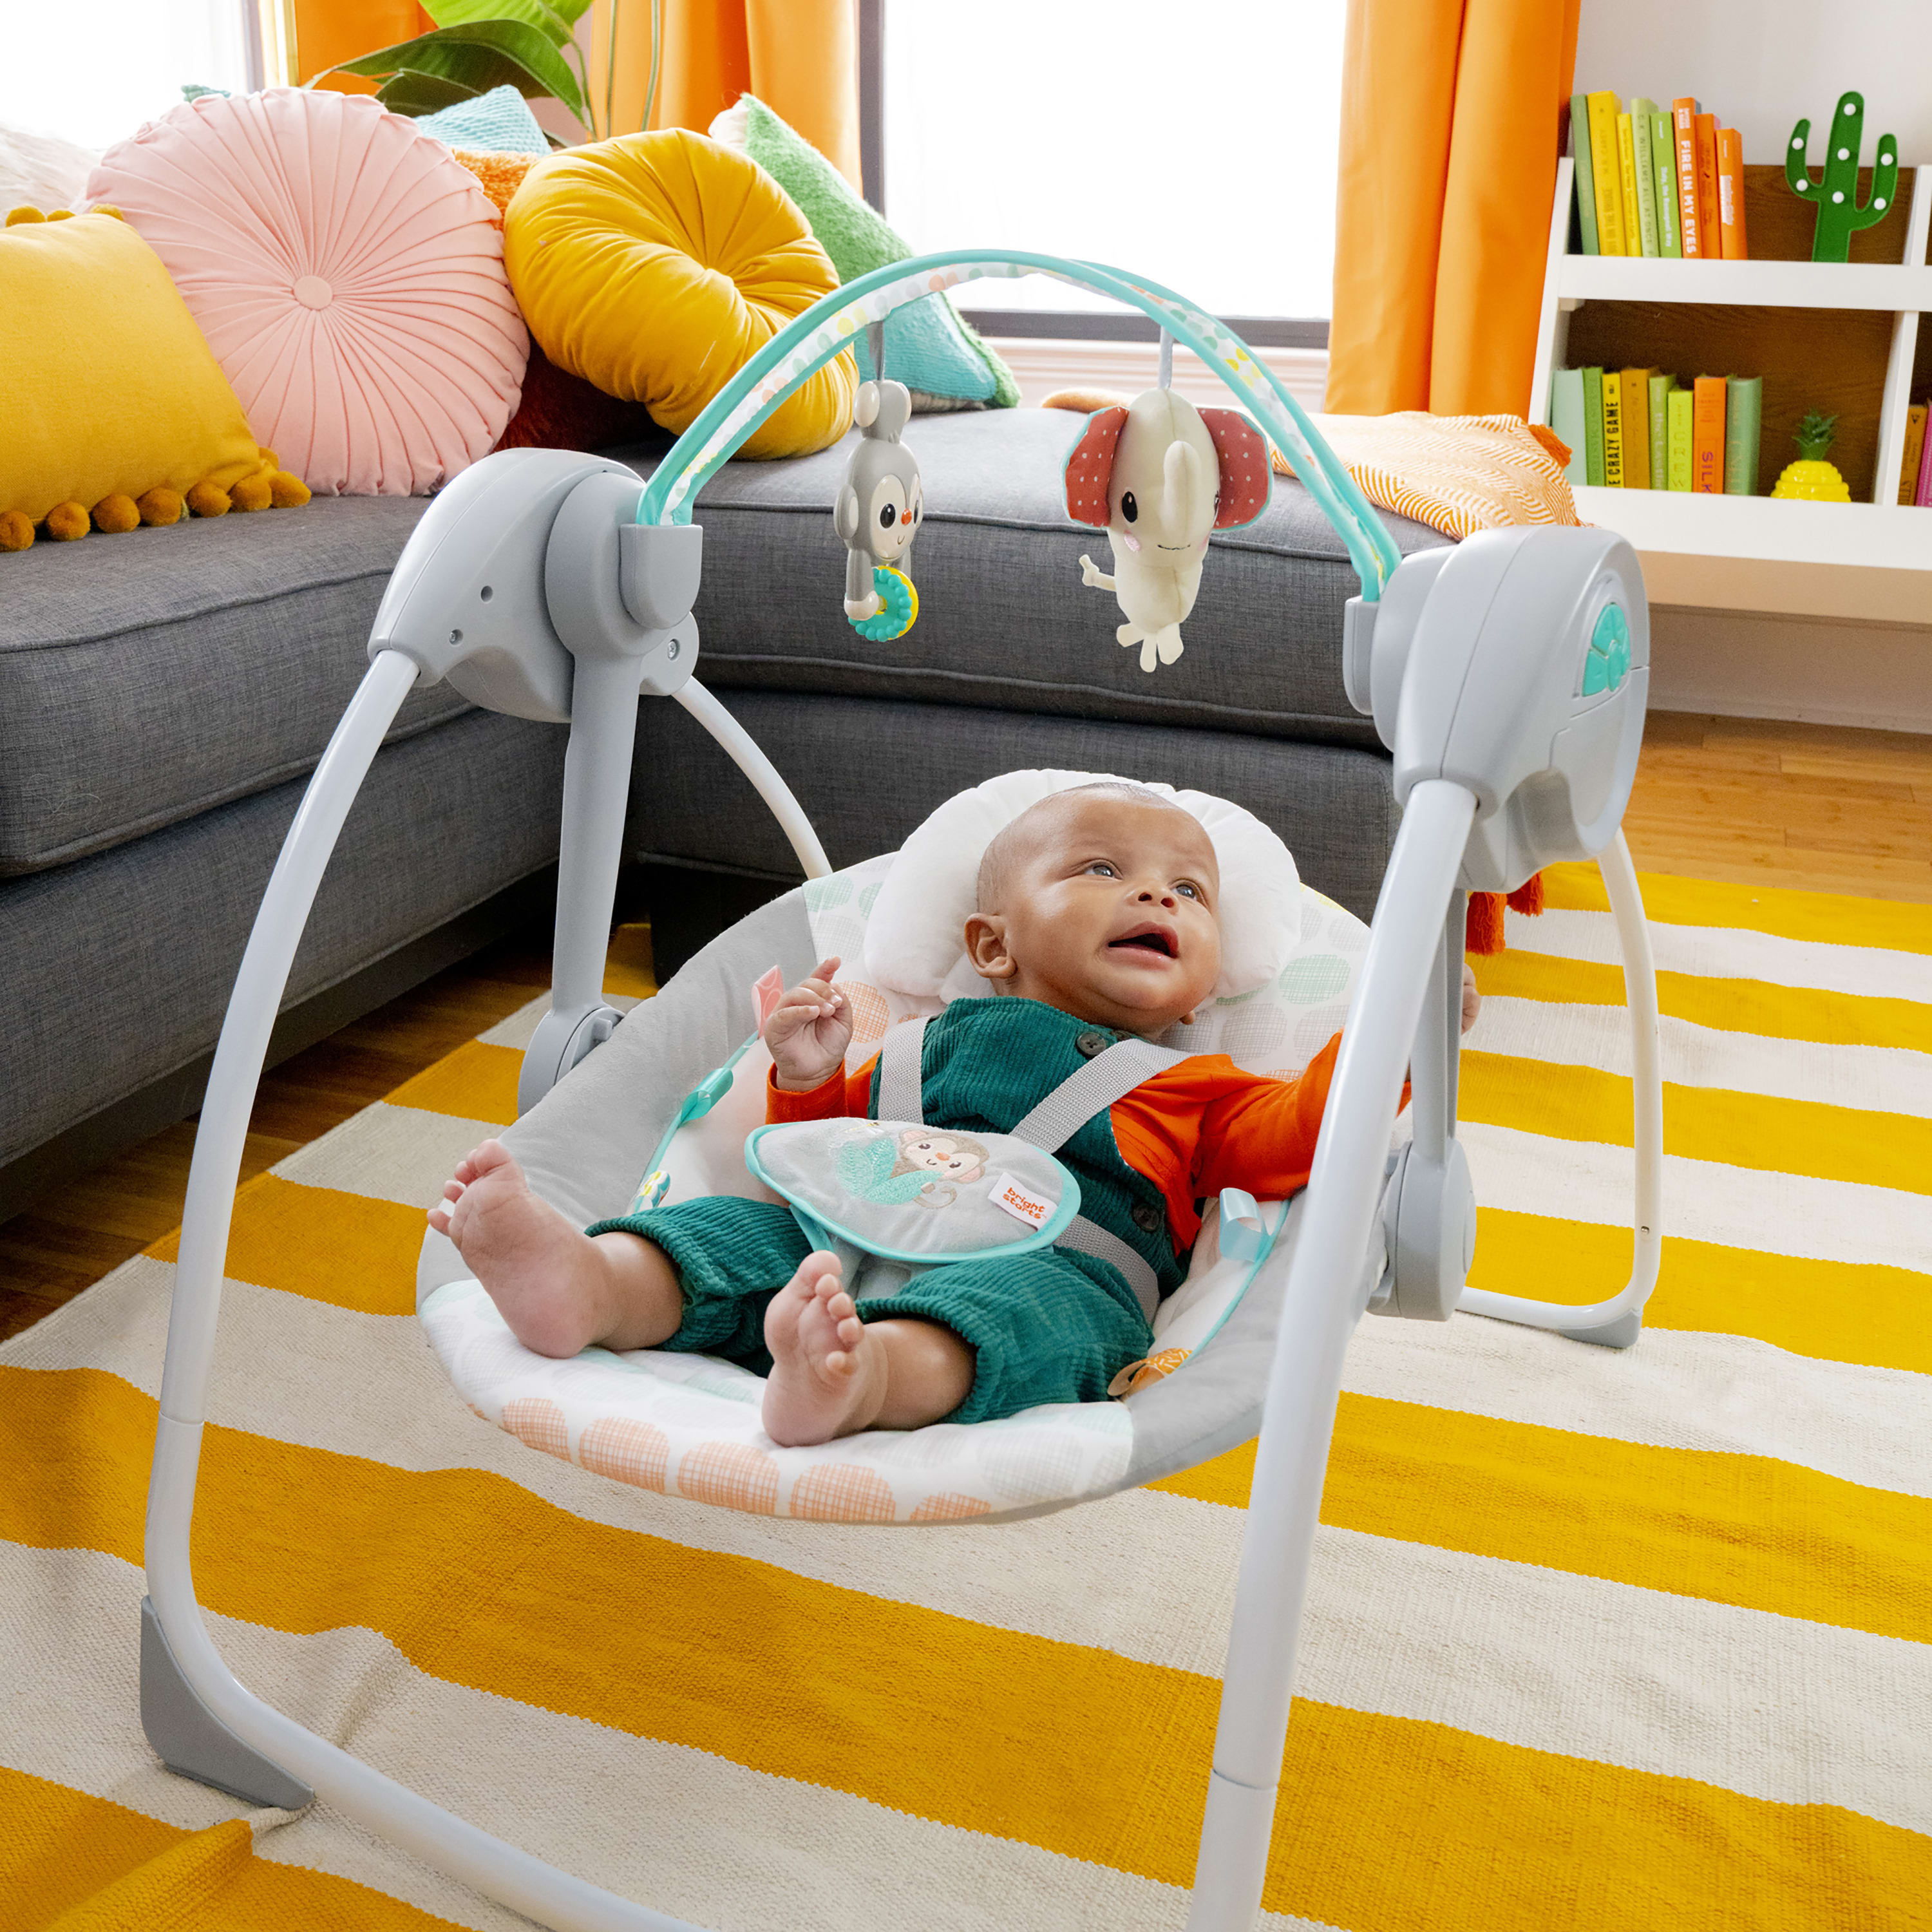 Bright Starts Whimsical Wild Portable Compact Baby Swing with Taggies, Unisex, Newborn and up - image 3 of 12